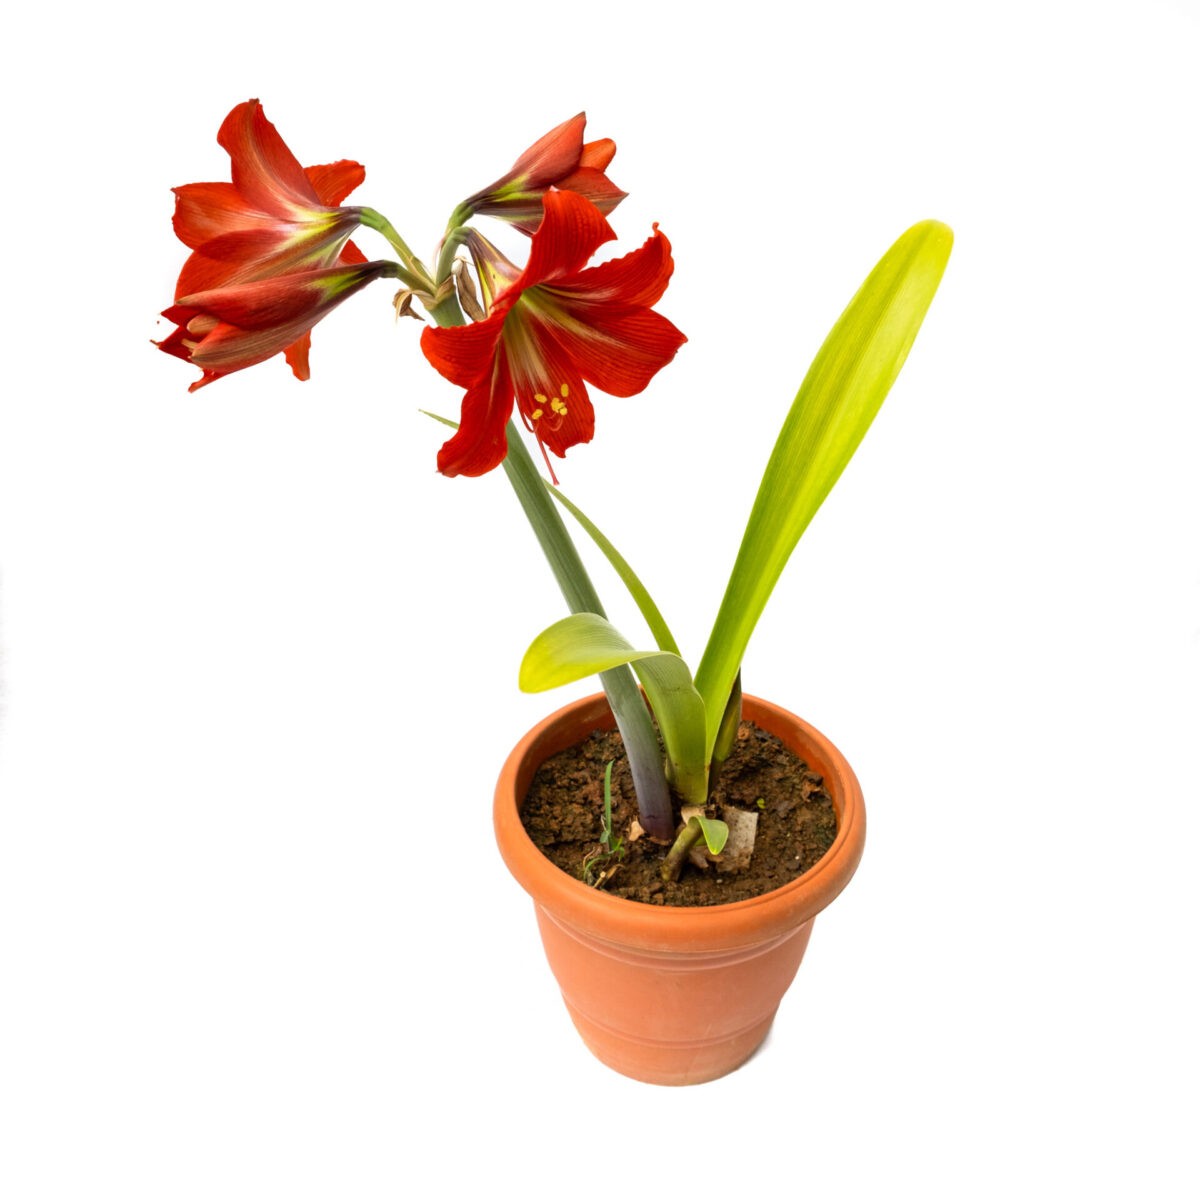 Amaryllis lily bulbs in bangalore nurseries for plants